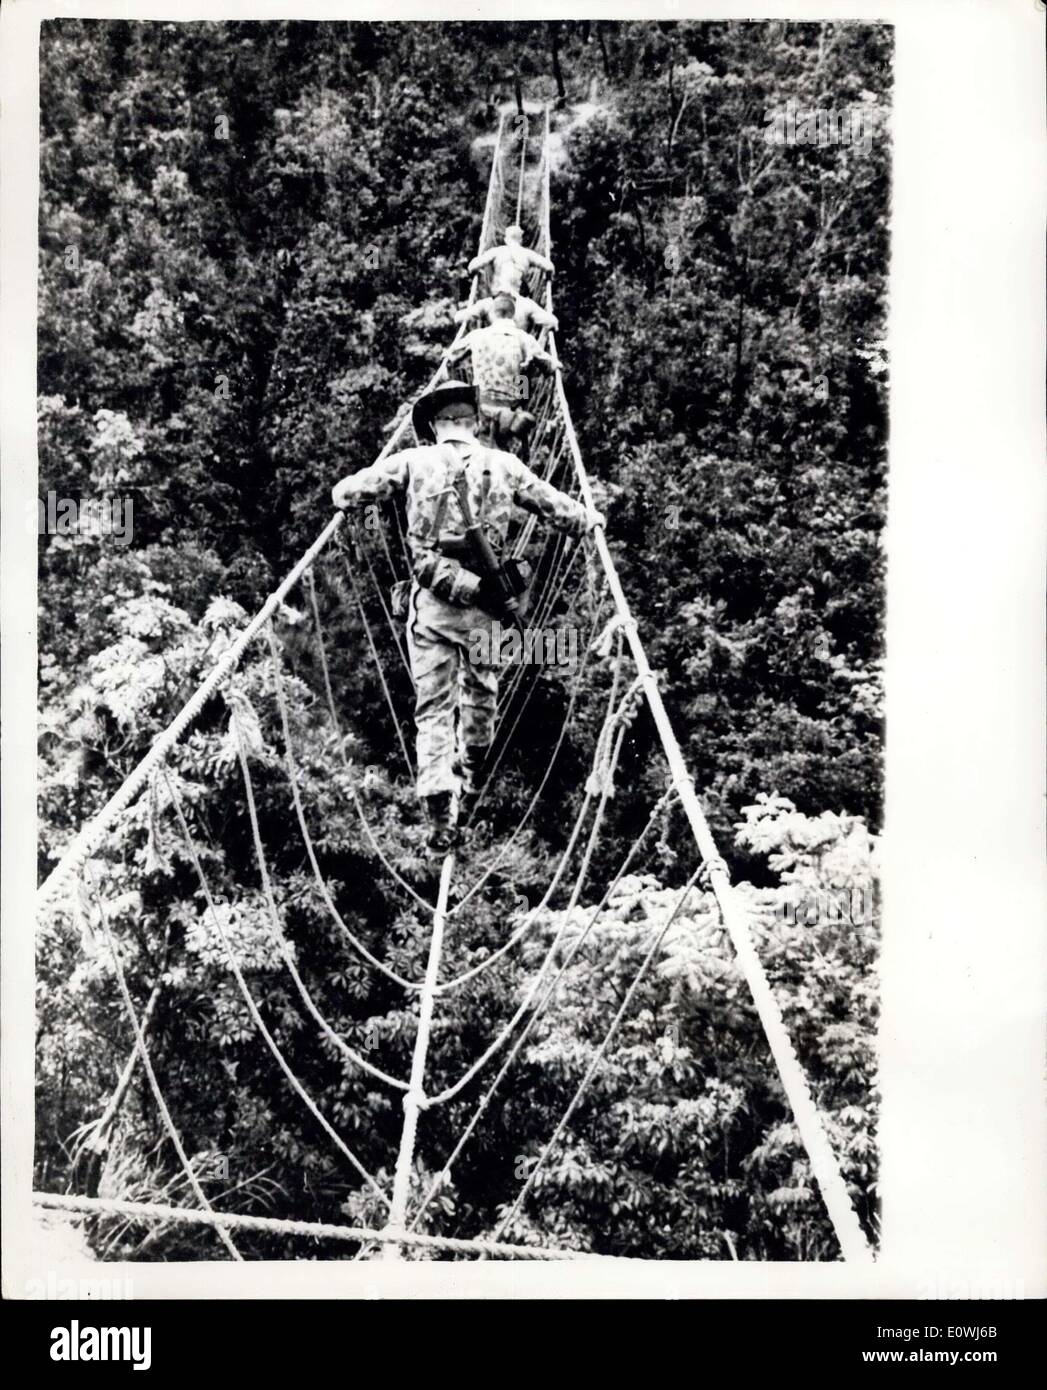 May 18, 1963 - Human to-tos learn the ropes.: In view of the trouble in South Vietnam, the United States have set-up a jungle training School in the hills of Okinawa so that they will be fully acquainted with the techniques of jungle warfare so that they can hold their own against the Communist guerillas in Leoa. The United States have some 12,000 men in South Vietnam and have suffered ''some casualties'' in addition the Vietnamese admit to having 4,000 killed and 6,000 wounded in the past year but it is claimed that 30,000 Communists have been killed Stock Photo